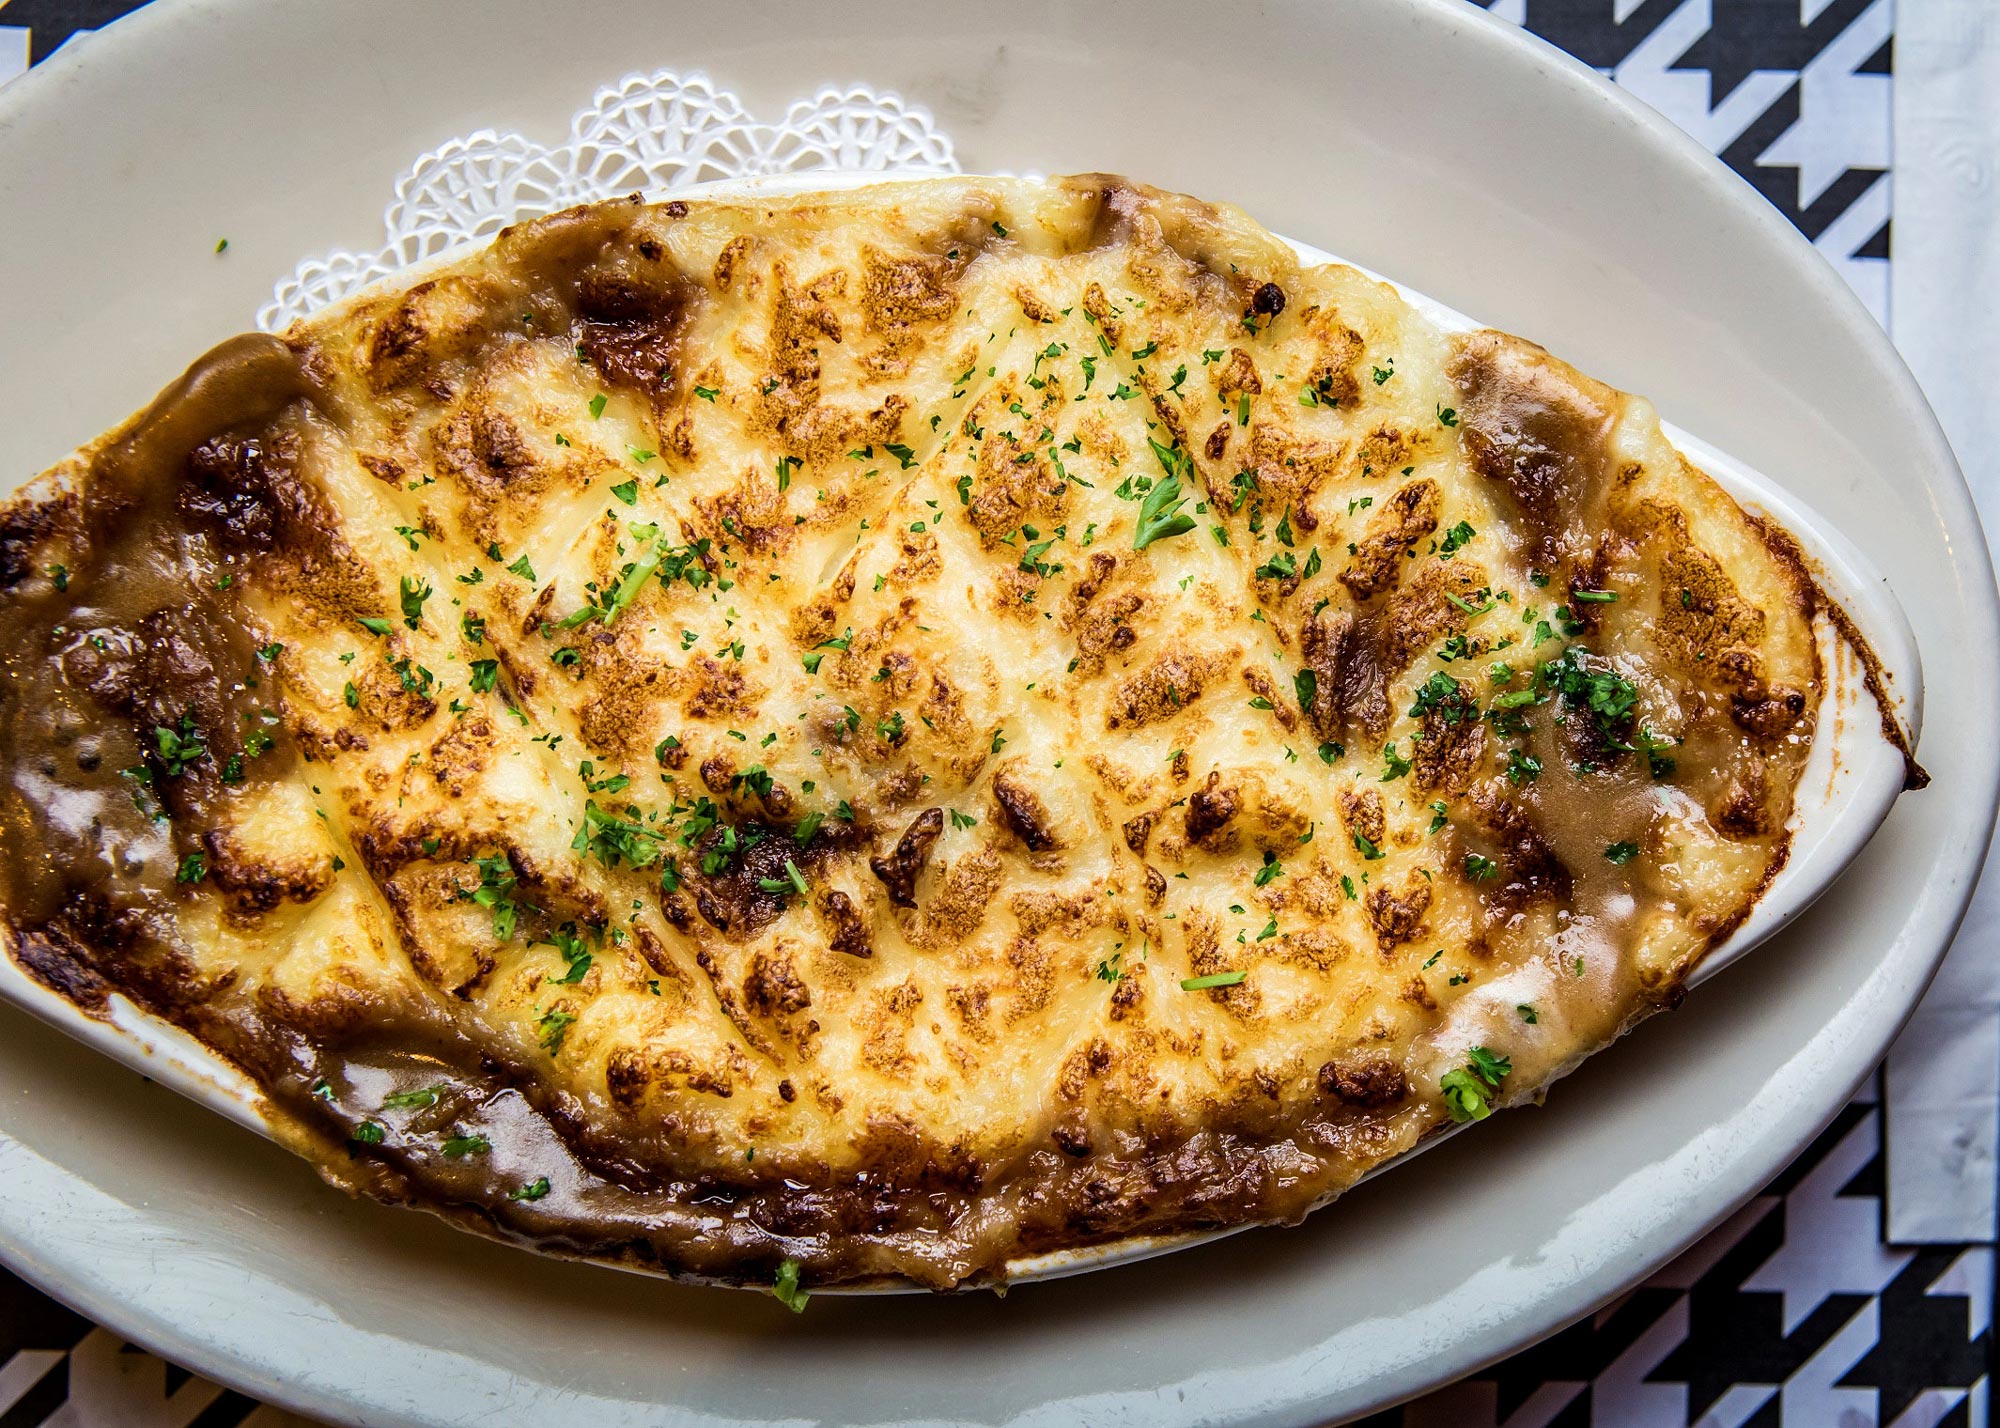 SHEPHERD’S PIE With ground lamb & sirloin, topped with a layer of whipped mashed potatoes